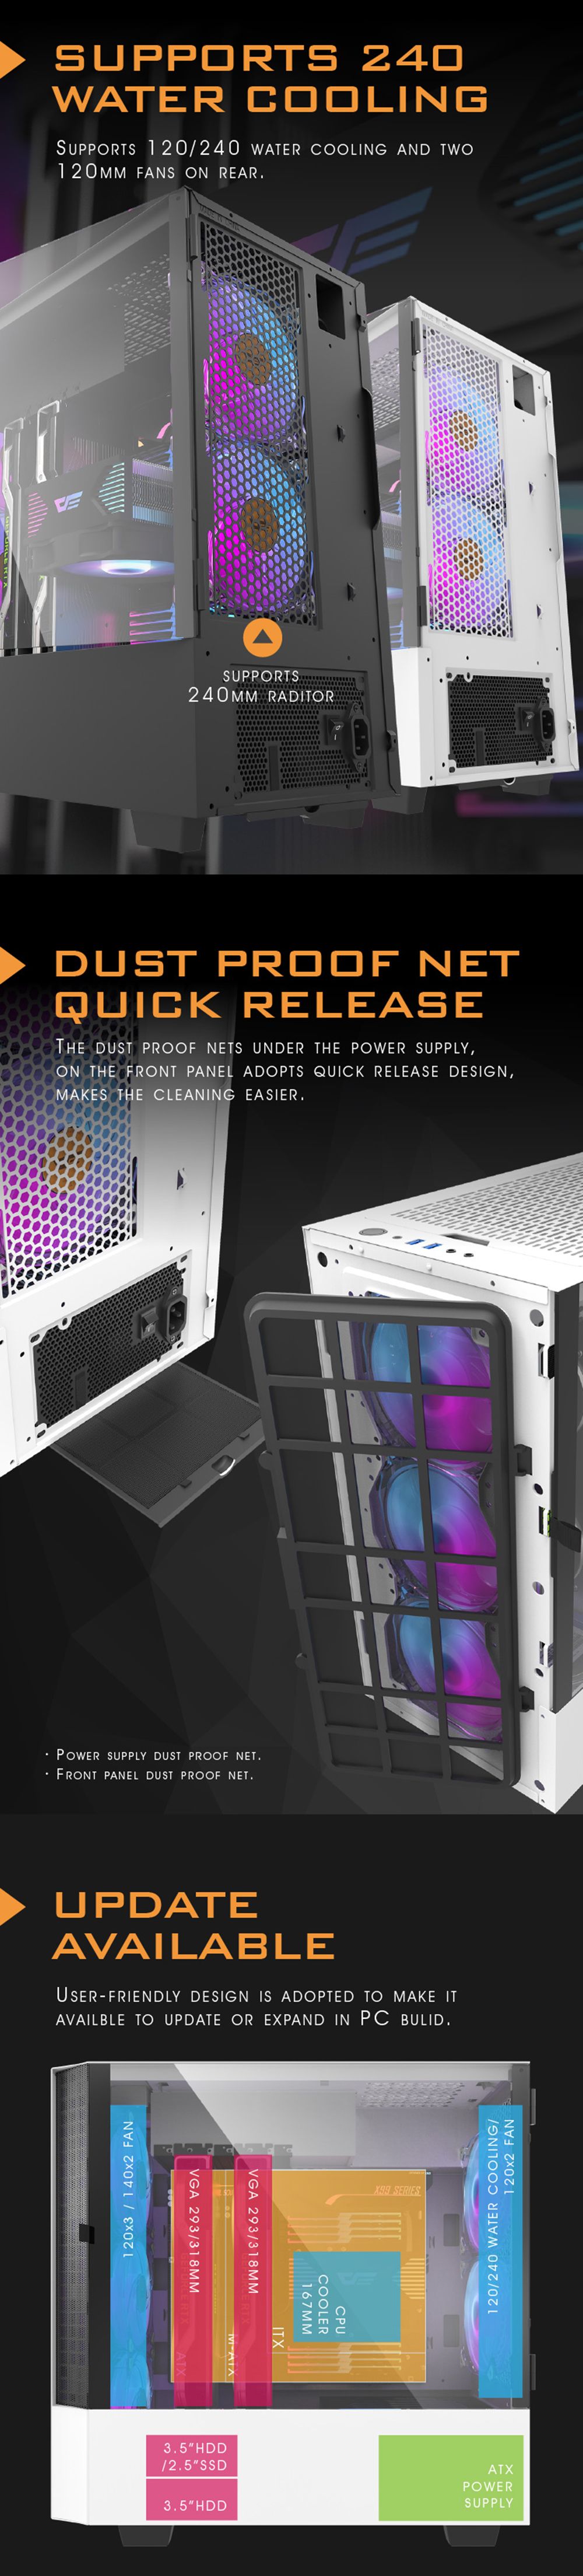 DarkFlash-DLV22-Gaming-Computer-Case-ATXM-ATXITX-Supported-Rightside-Door-Opening-Dust-Proof-Net-Bla-1666463